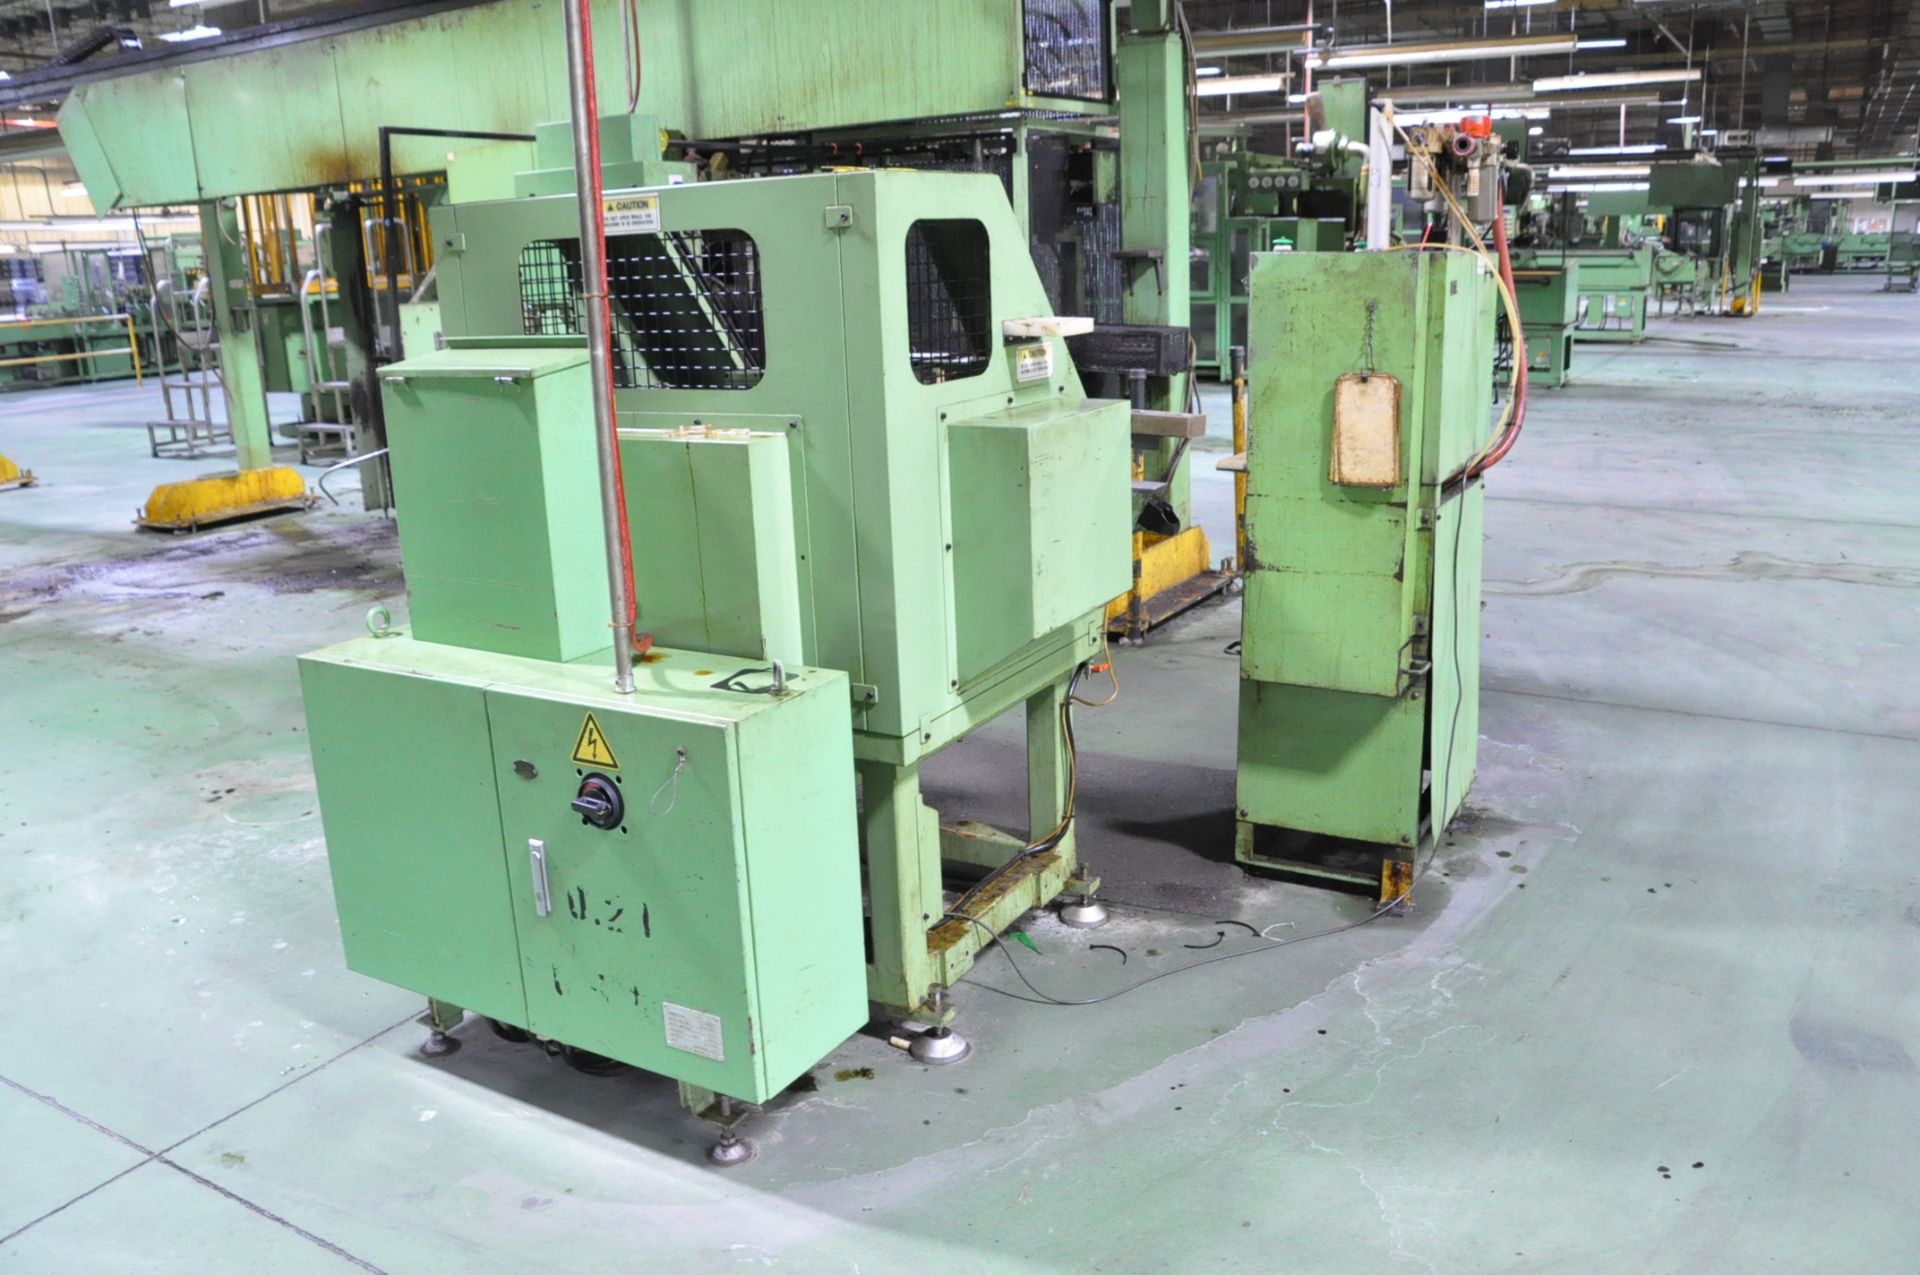 Nissin Model 016012, Outer Deburring Machine, S/n N/a (2010), (C-10) - Image 3 of 6